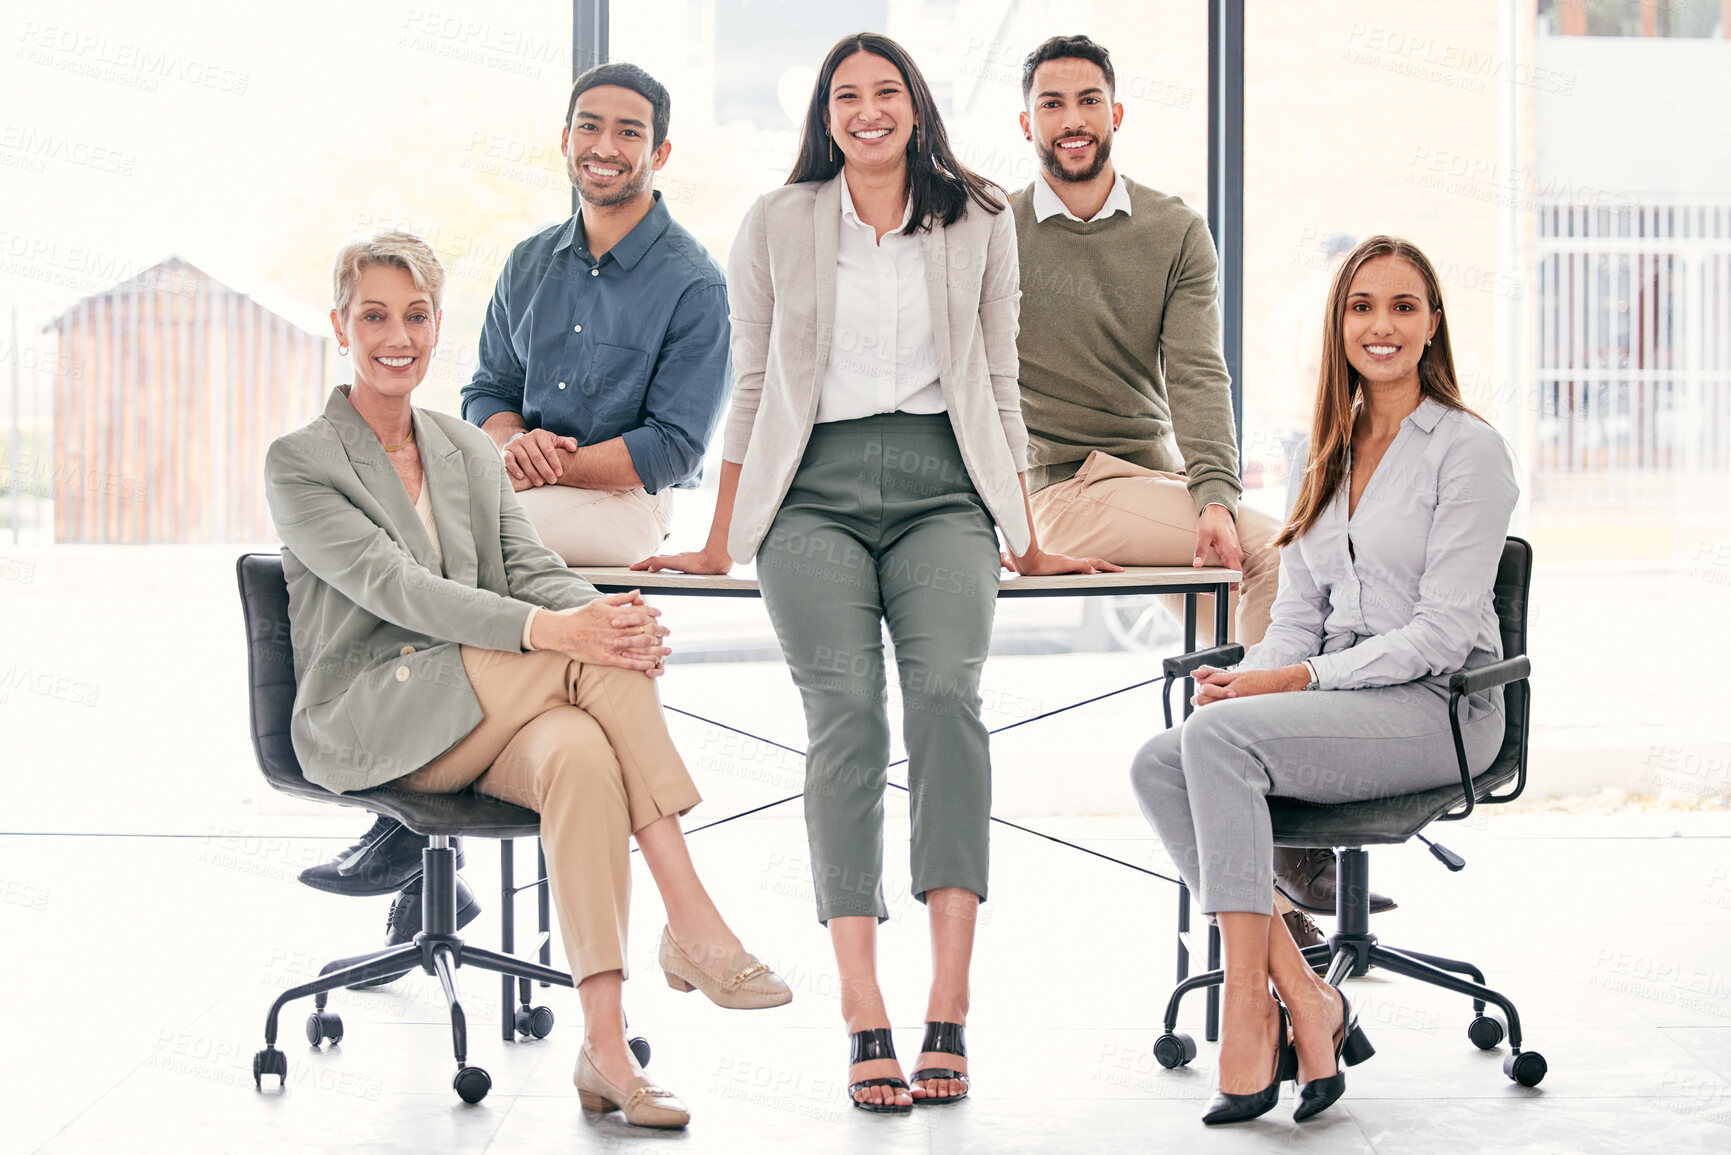 Buy stock photo Full length shot of a diverse group of businesspeople sitting together in the office during the day